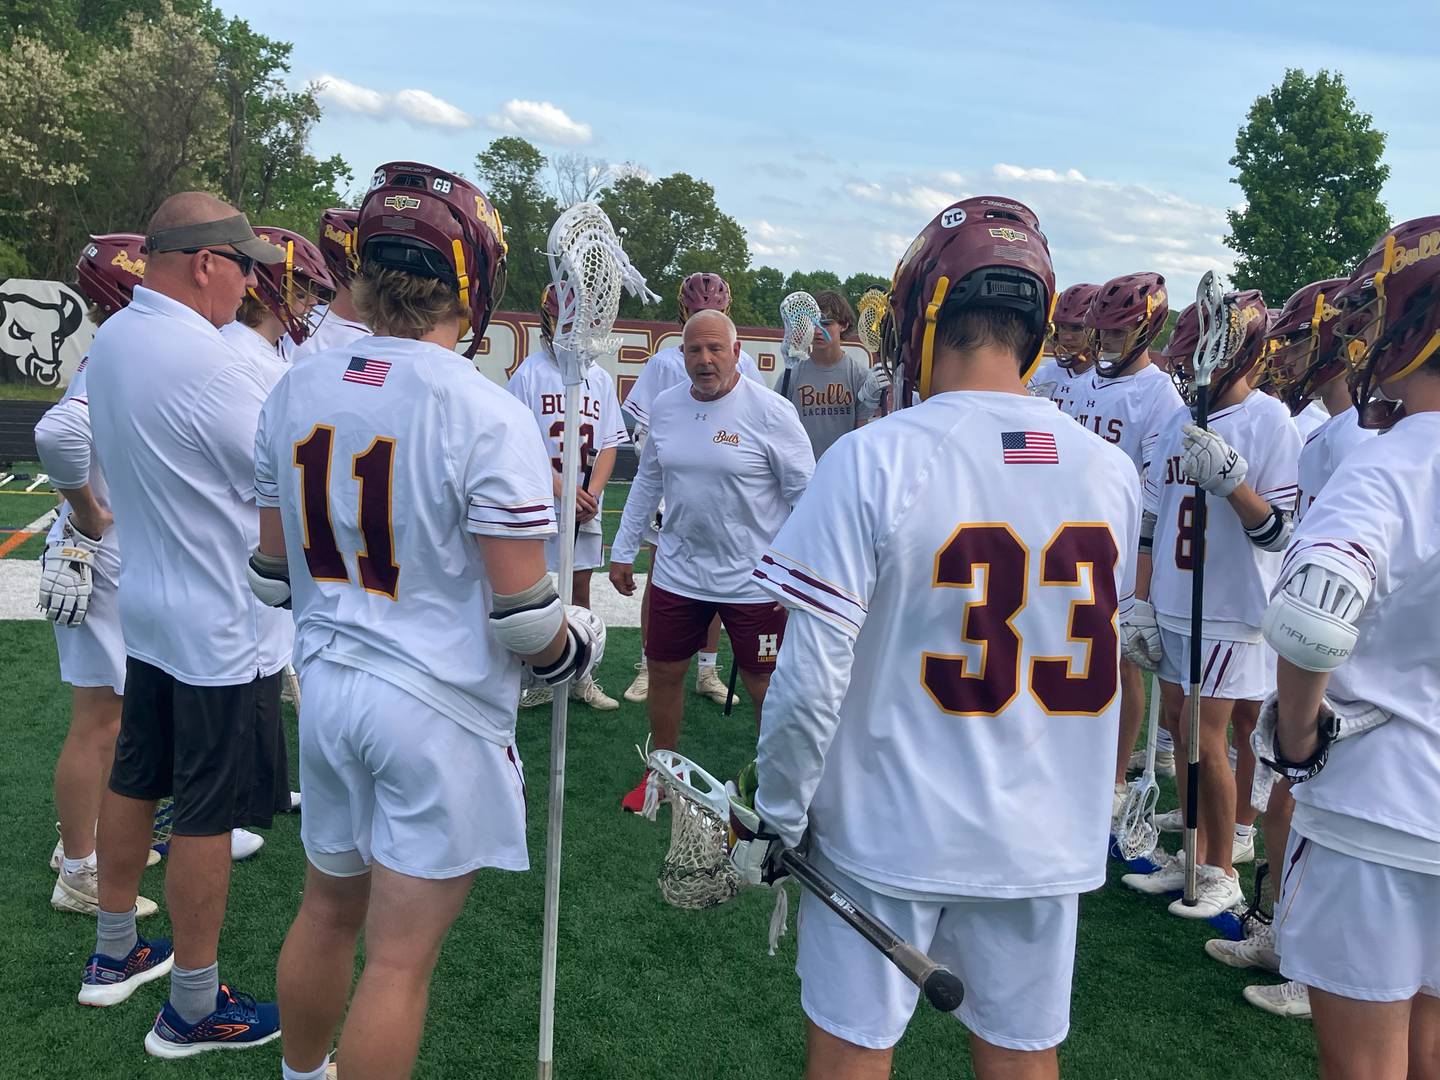 Hereford assistant coach Steve Turnbaugh instructs the Bulls’ defense during the first quarter of the Baltimore County championship game against Catonsville on Monday. The Bulls won, 11-10.